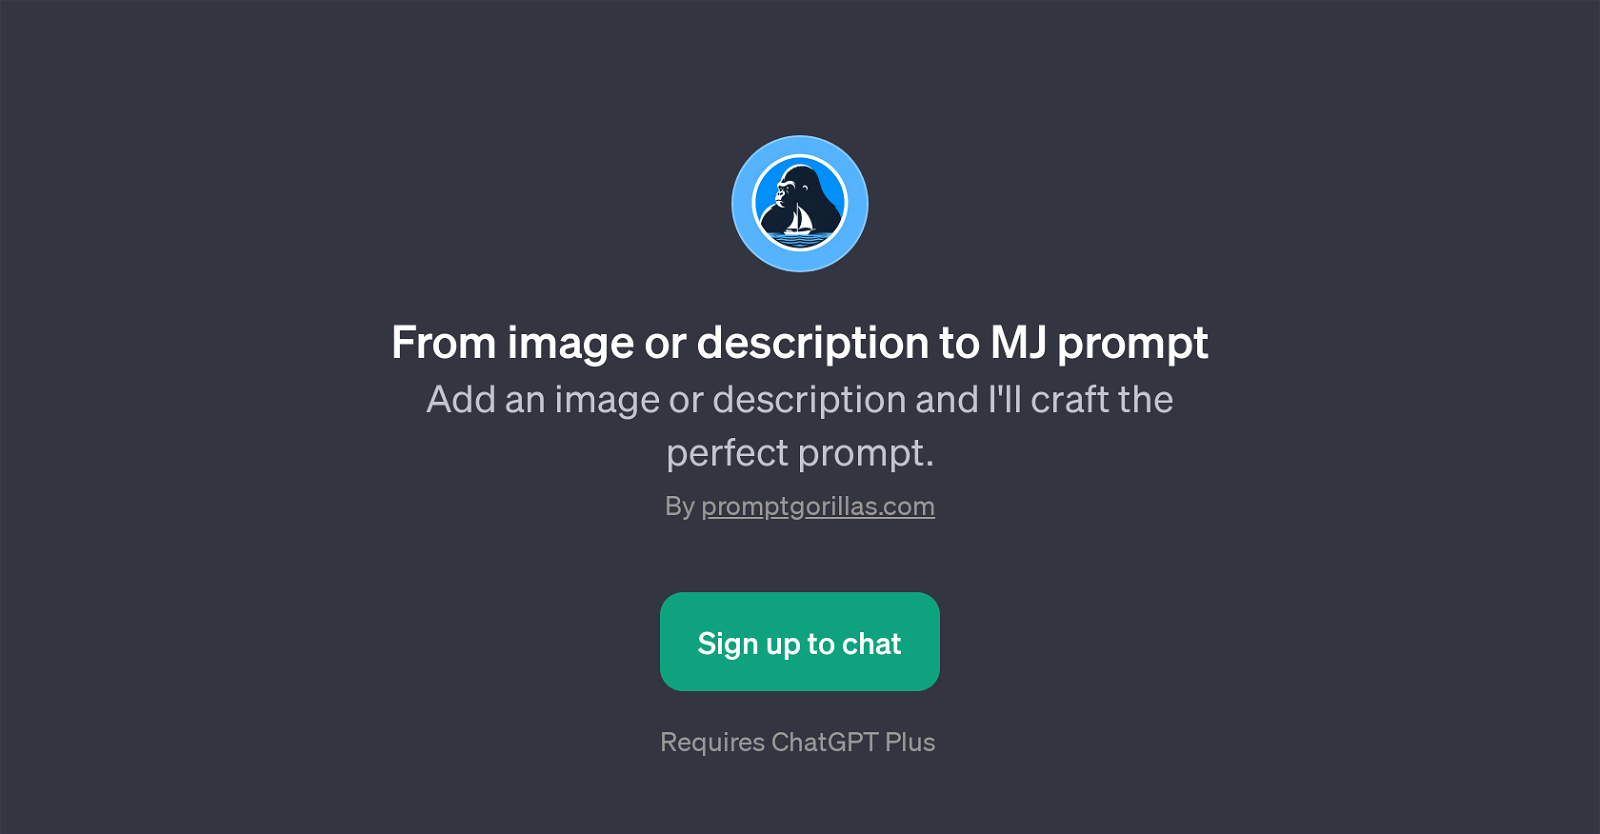 From image or description to MJ prompt website